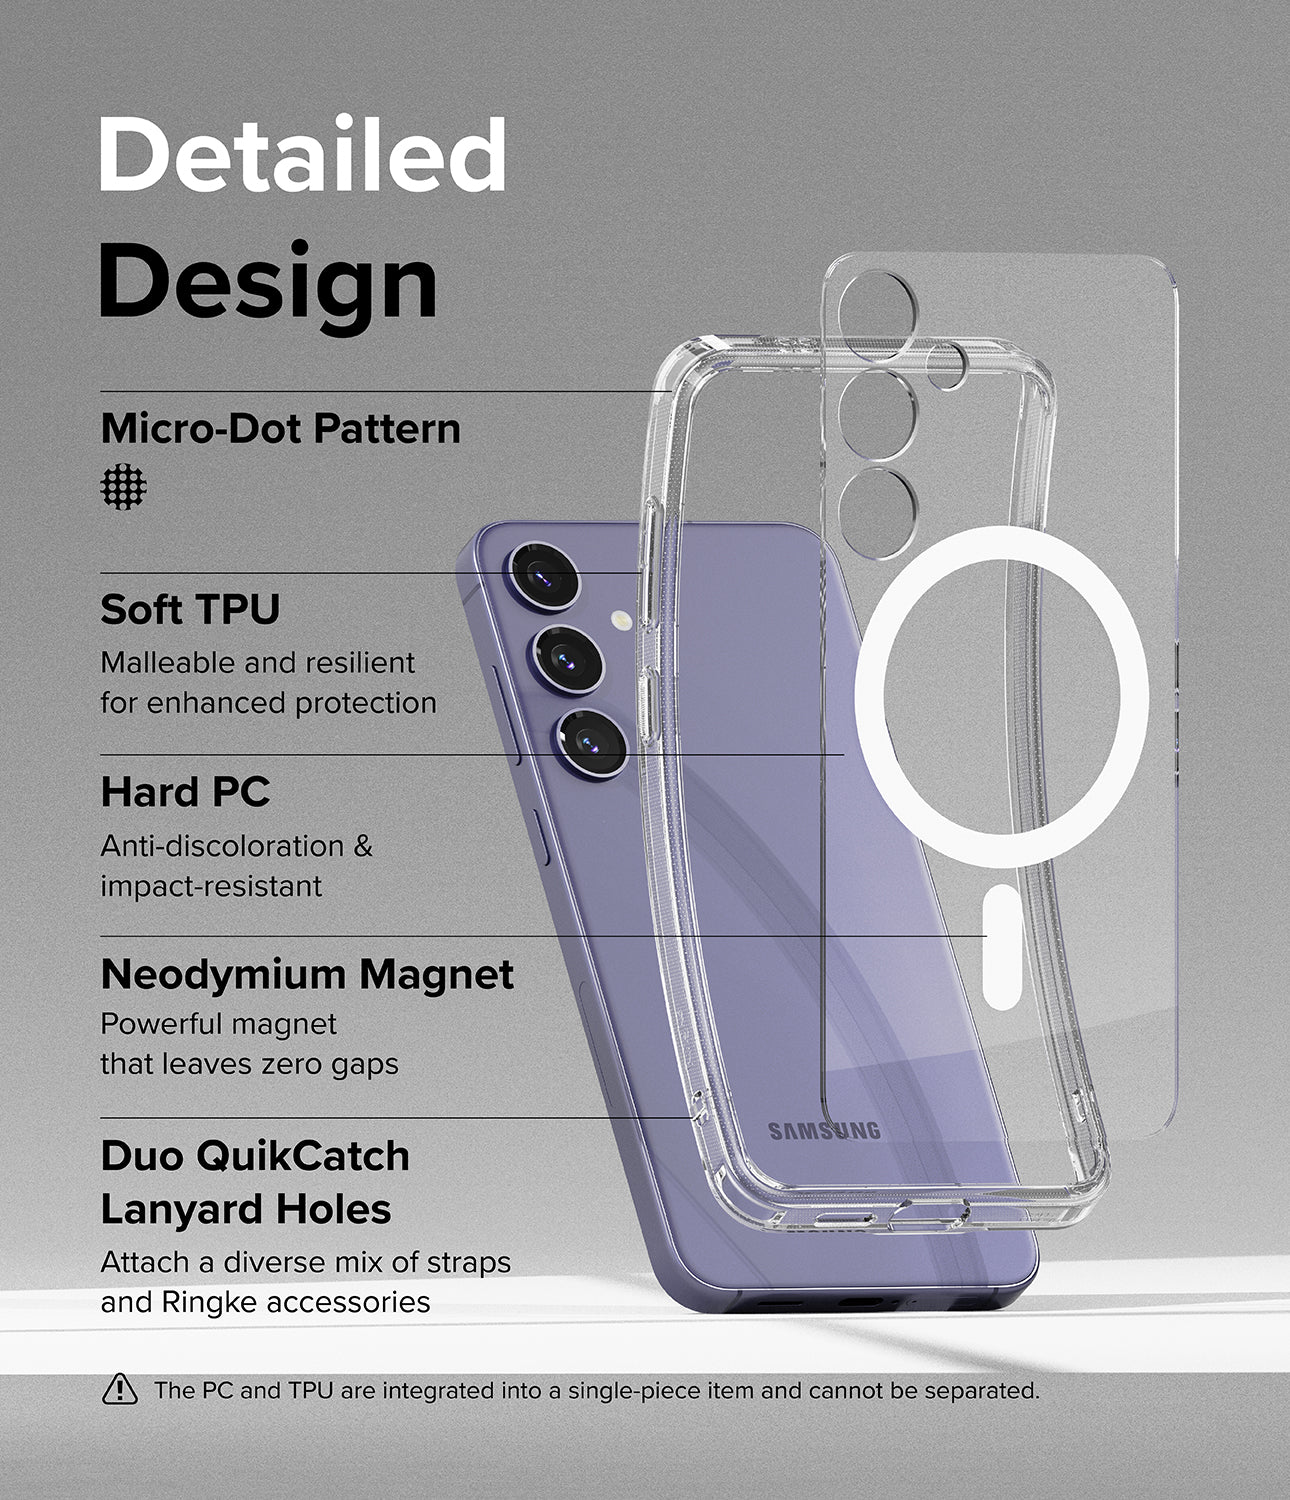 Galaxy S24 Case | Fusion Magnetic - Detailed Design. Micro-Dot Pattern. Malleable and resilient for enhanced protection with Soft TPU. Anti-discoloration and impact-resistant with Hard PC. Powerful neodymium magnet that leaves zero gaps. Duo QuikCatch Lanyard Holes to attach a diverse mix of straps and Ringke accessories.